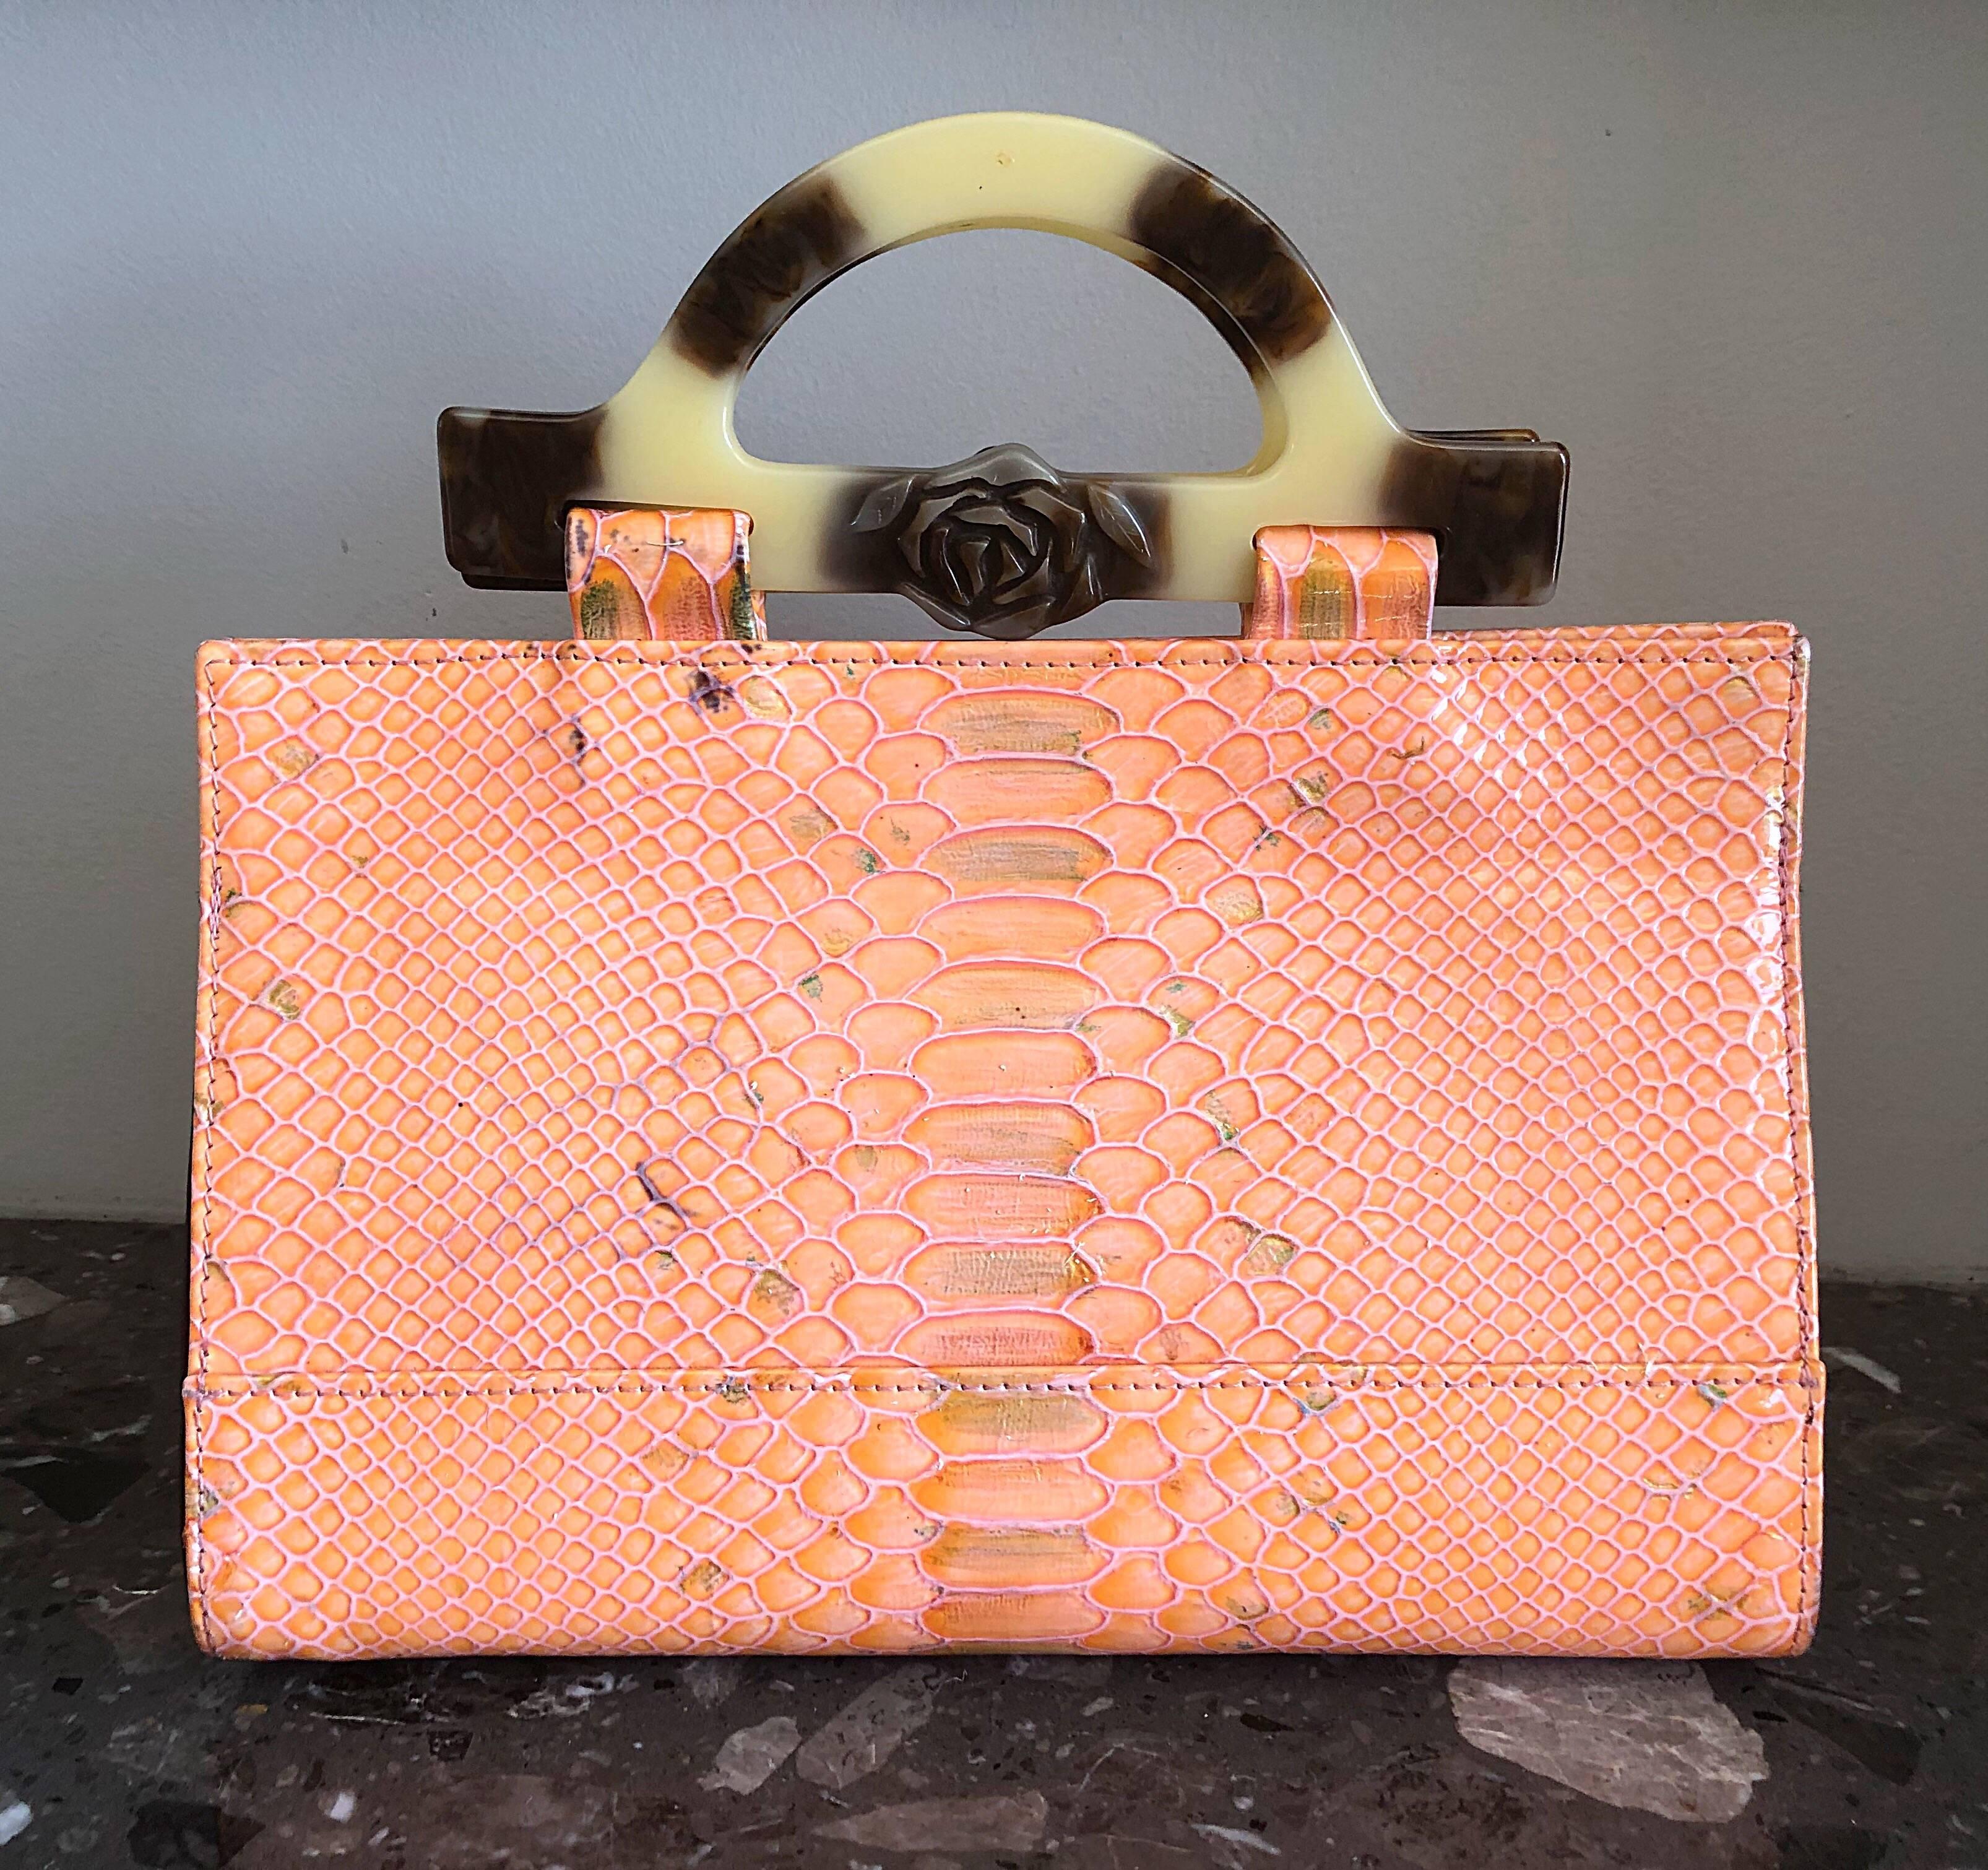 One-of-a-kind ROBERTO VASCON vintage 90s pink python snake skin satchel bag! Roberto Vascon bags were hugely sought after in the 1990s, and production often could not keep up with demand. Nearly all of the designer's pieces were uniquely